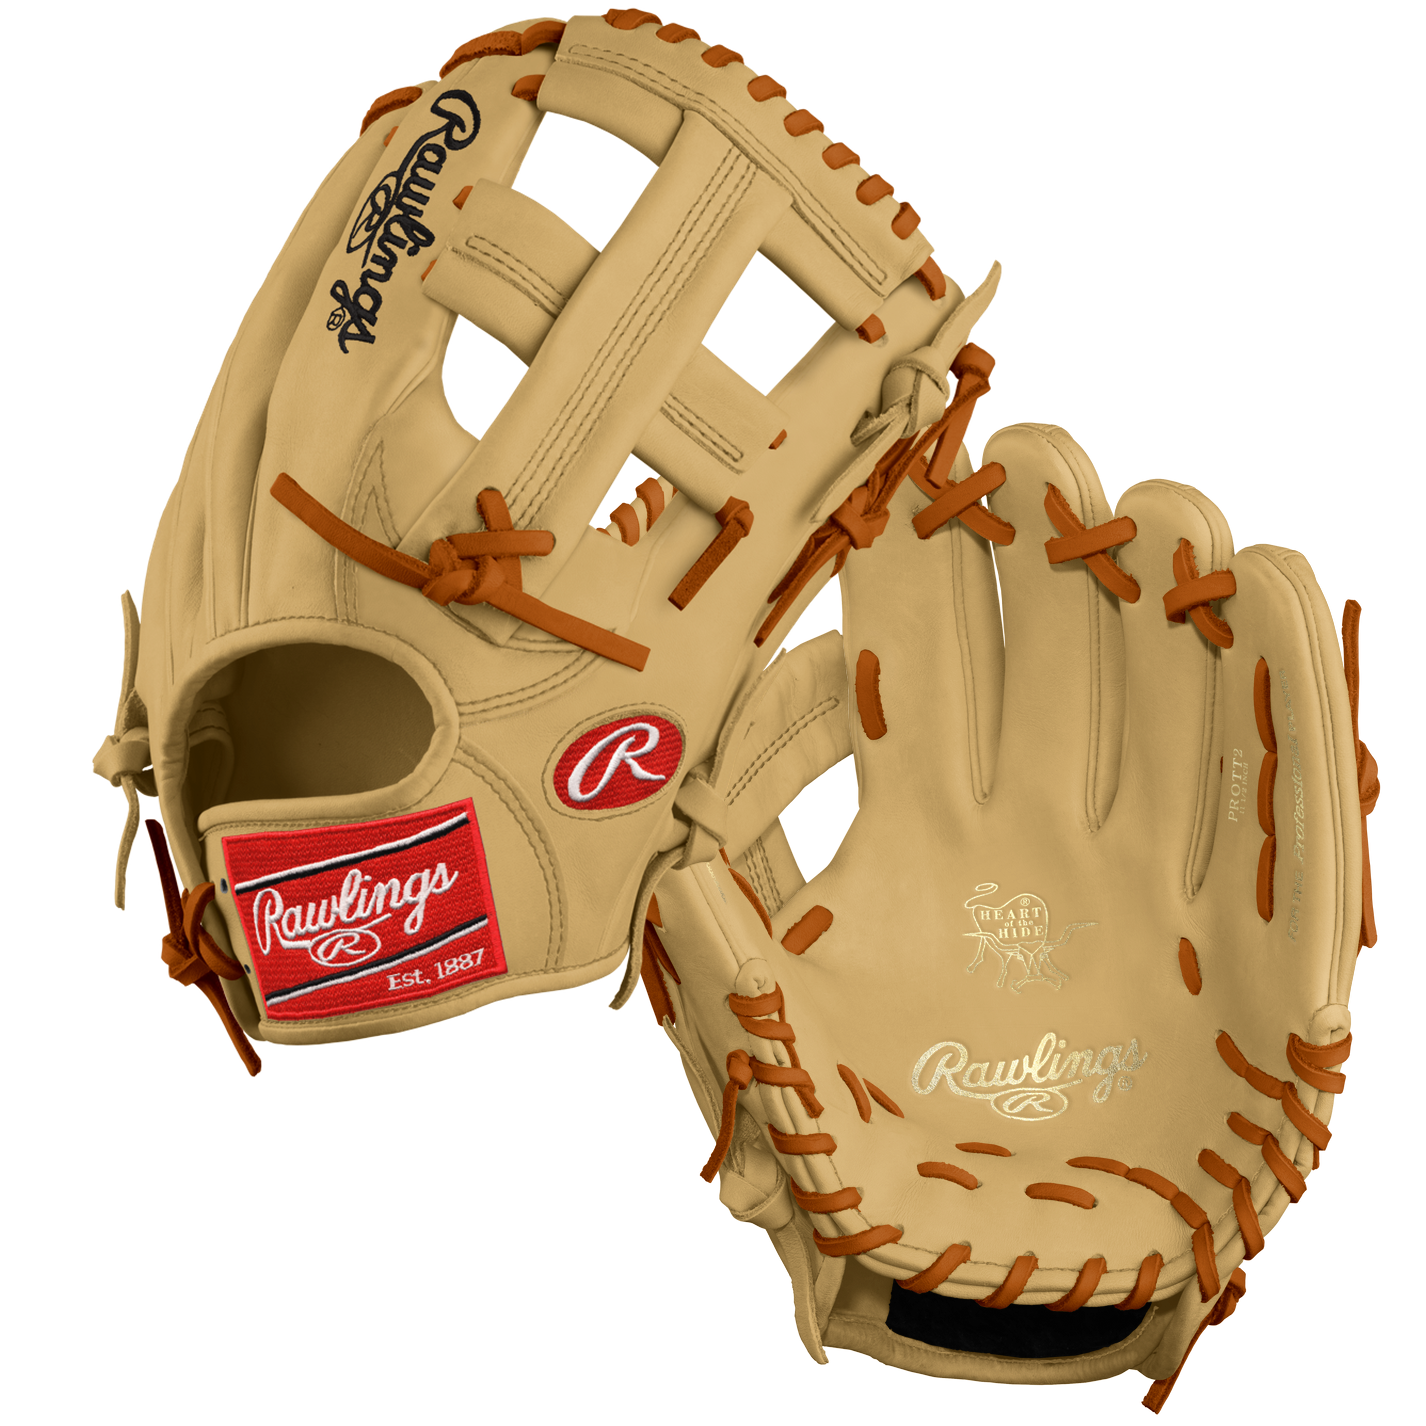        Pattern TT2 Sport Baseball Leather Heart of the Hide Fit Standard Throwing Hand Right-Hand Throw Position Infield Size 11 1/2 Web Single Post w/ X Lace Color Camel Logo Patch White on Scarlet Leather Color Camel Shell Palm Camel Laces  Lining Camel Shell Palm Color Welting Palm Camel Welting Back Camel Binding Camel Camel Stitching Stamping Gold Heel Pad Full Wrist Lining Thermo Formed Break-In Standard     